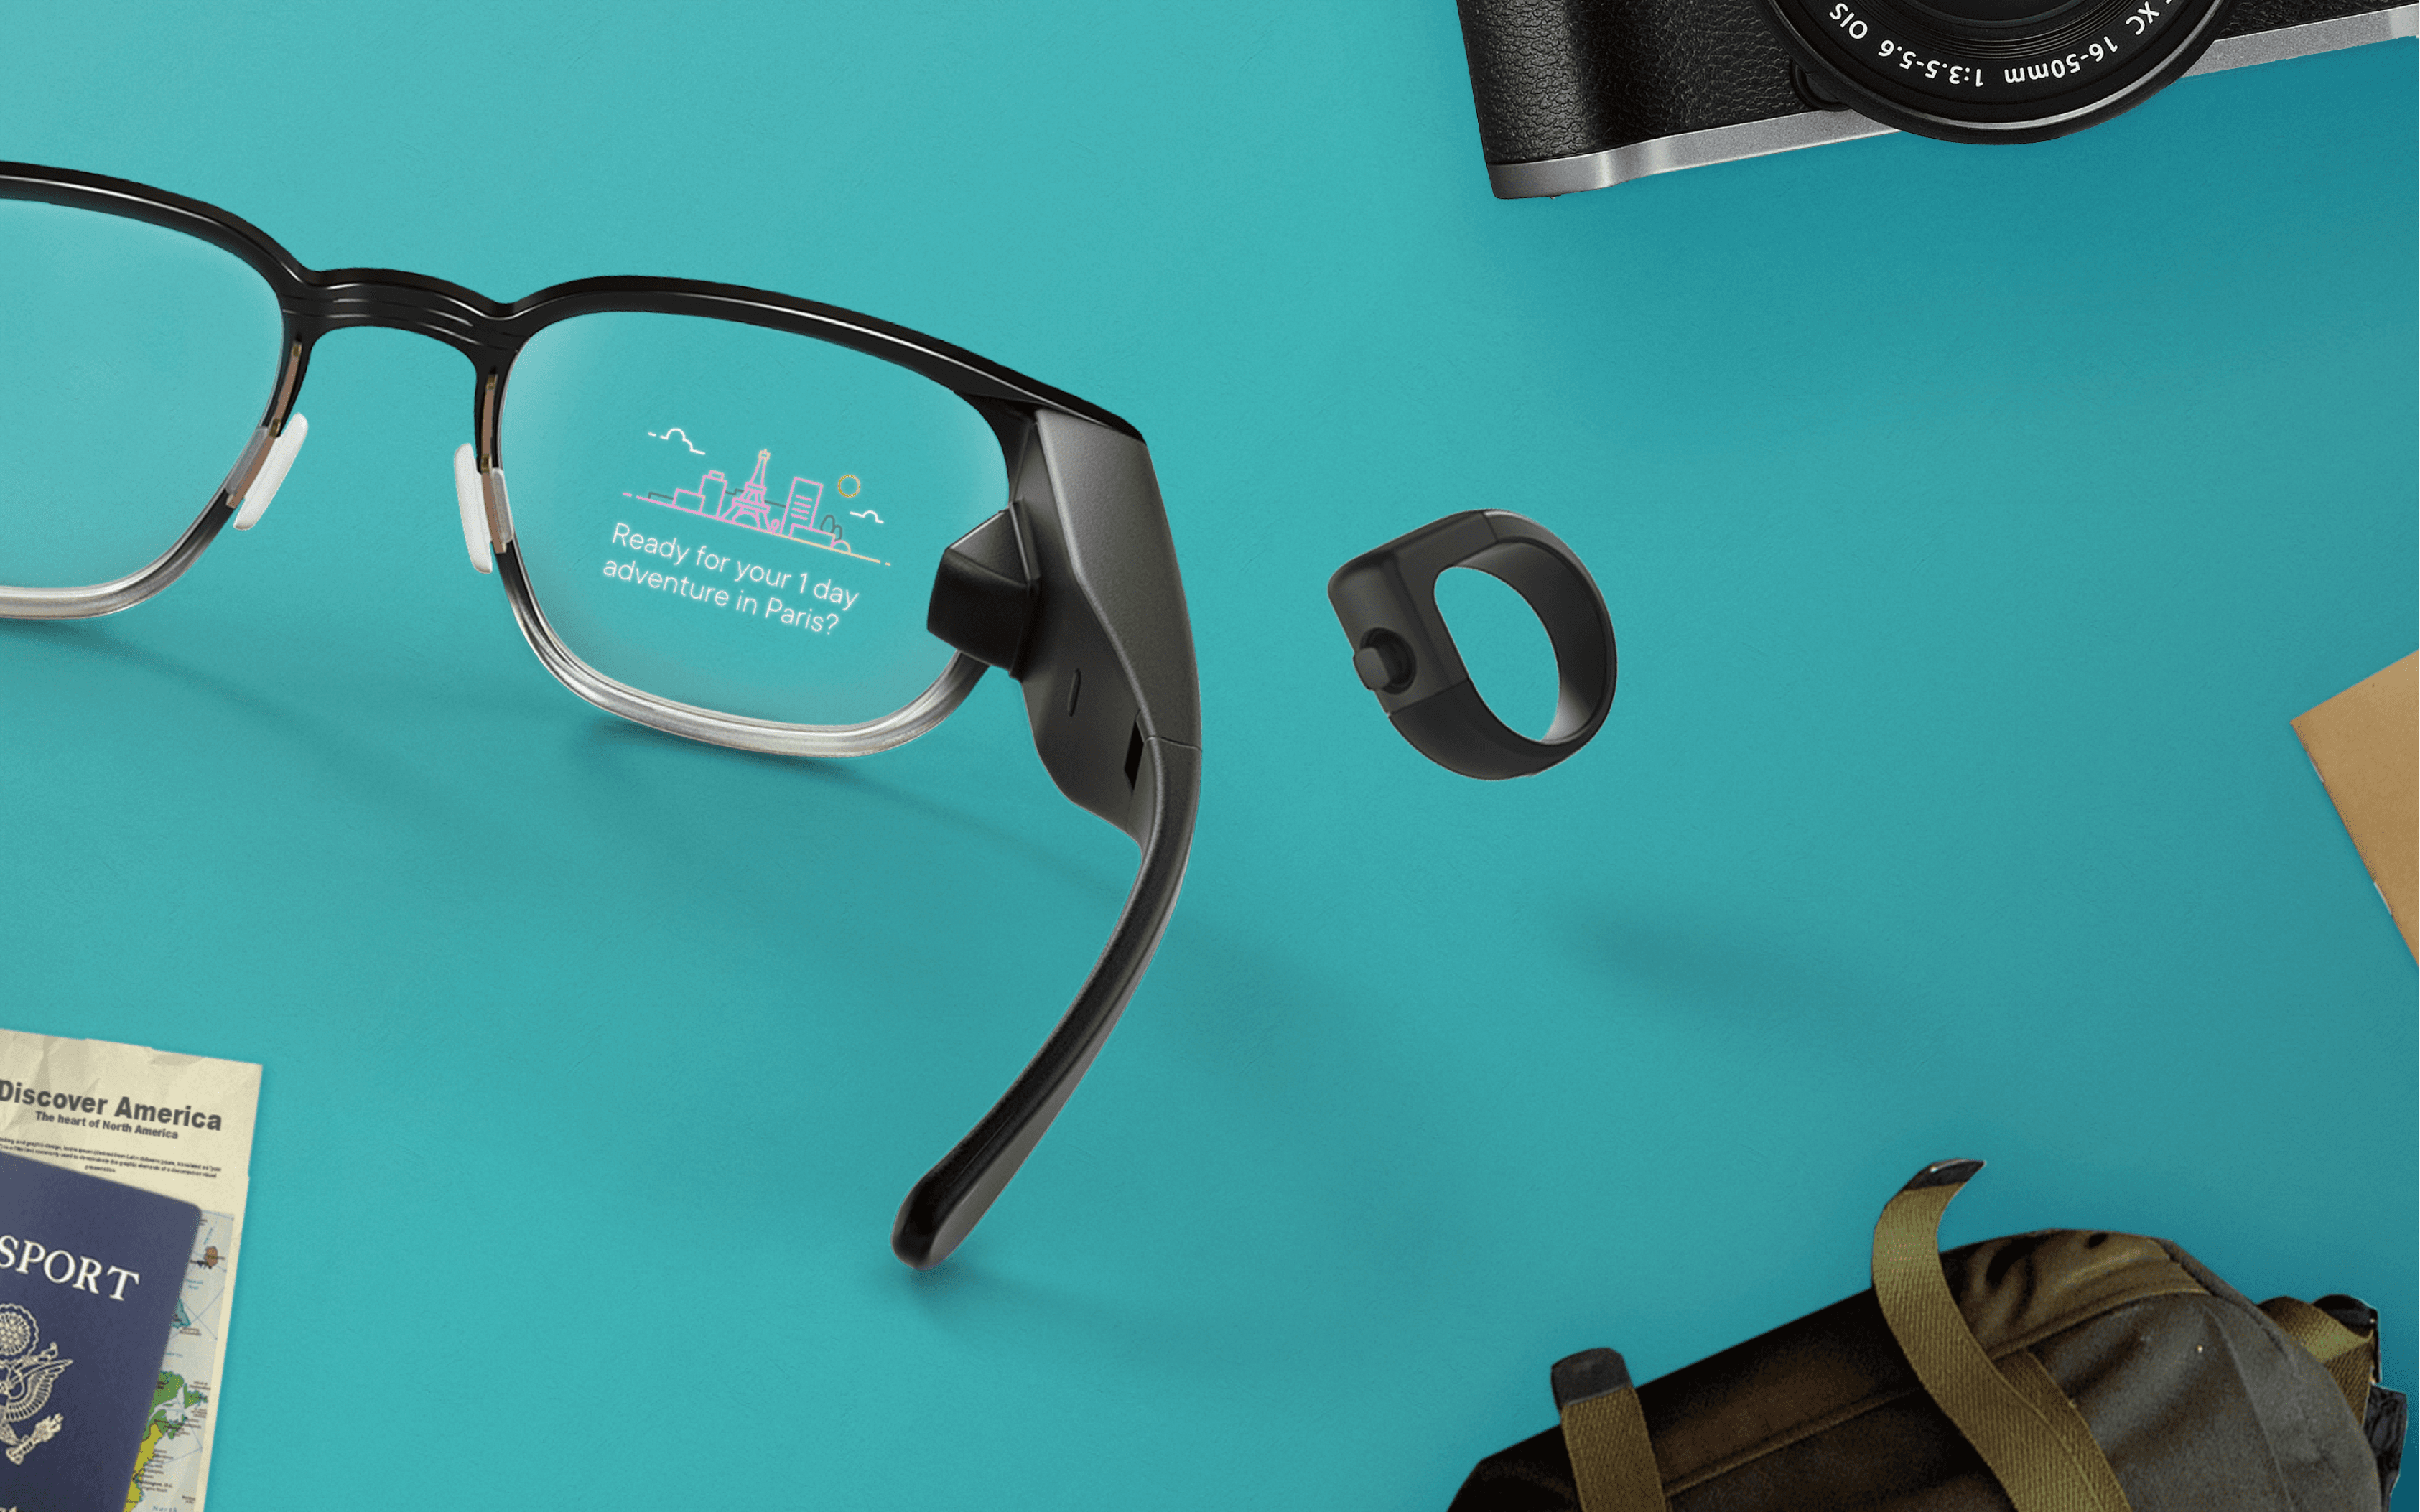 A pair of North AR smart glasses surrounded by a passport, backpack, camera, and ring.